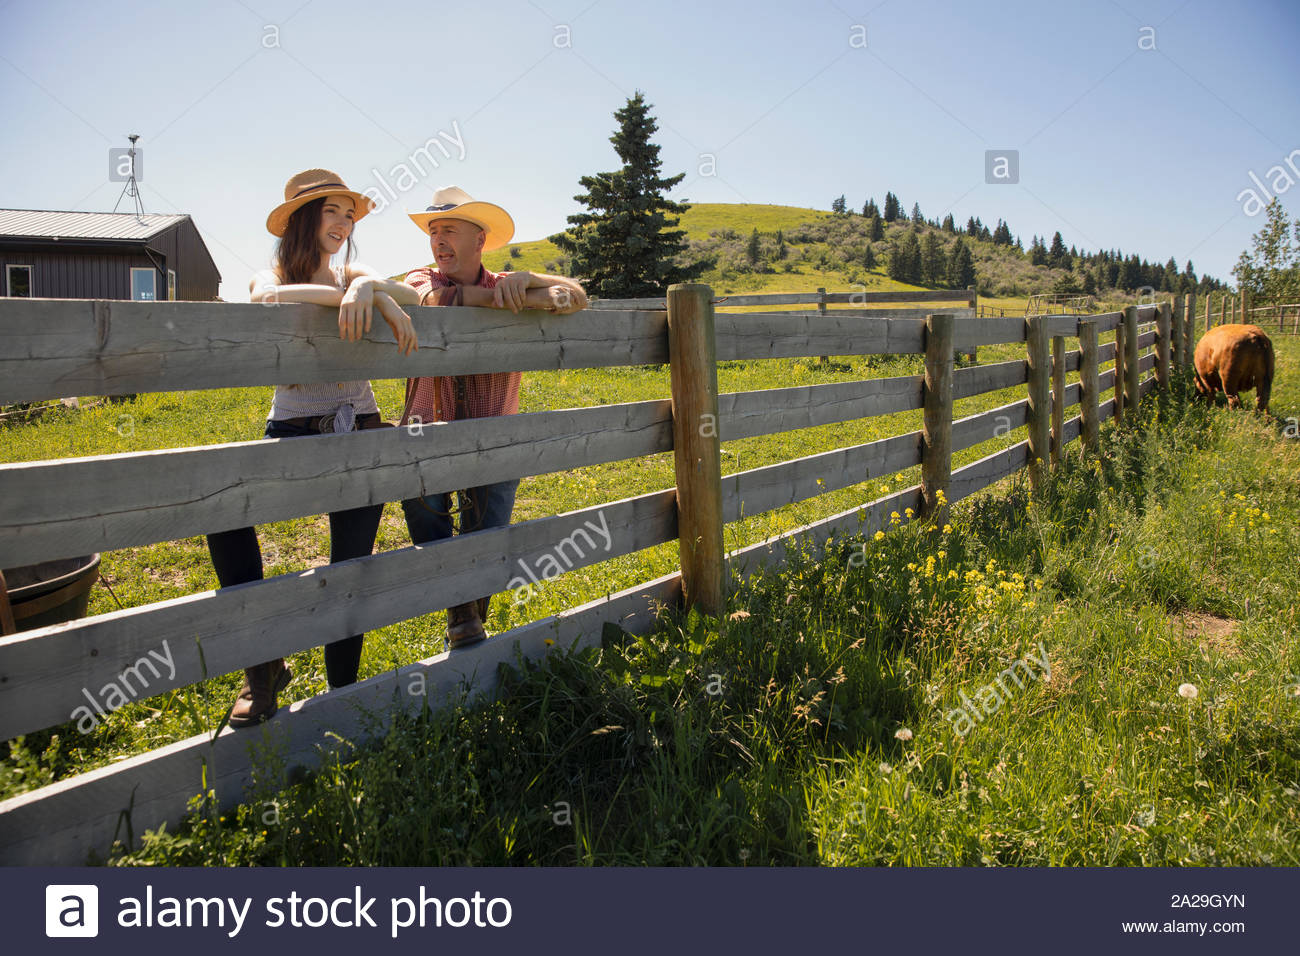 Ranch owner talking to daughter by wooden fence Stock Photo